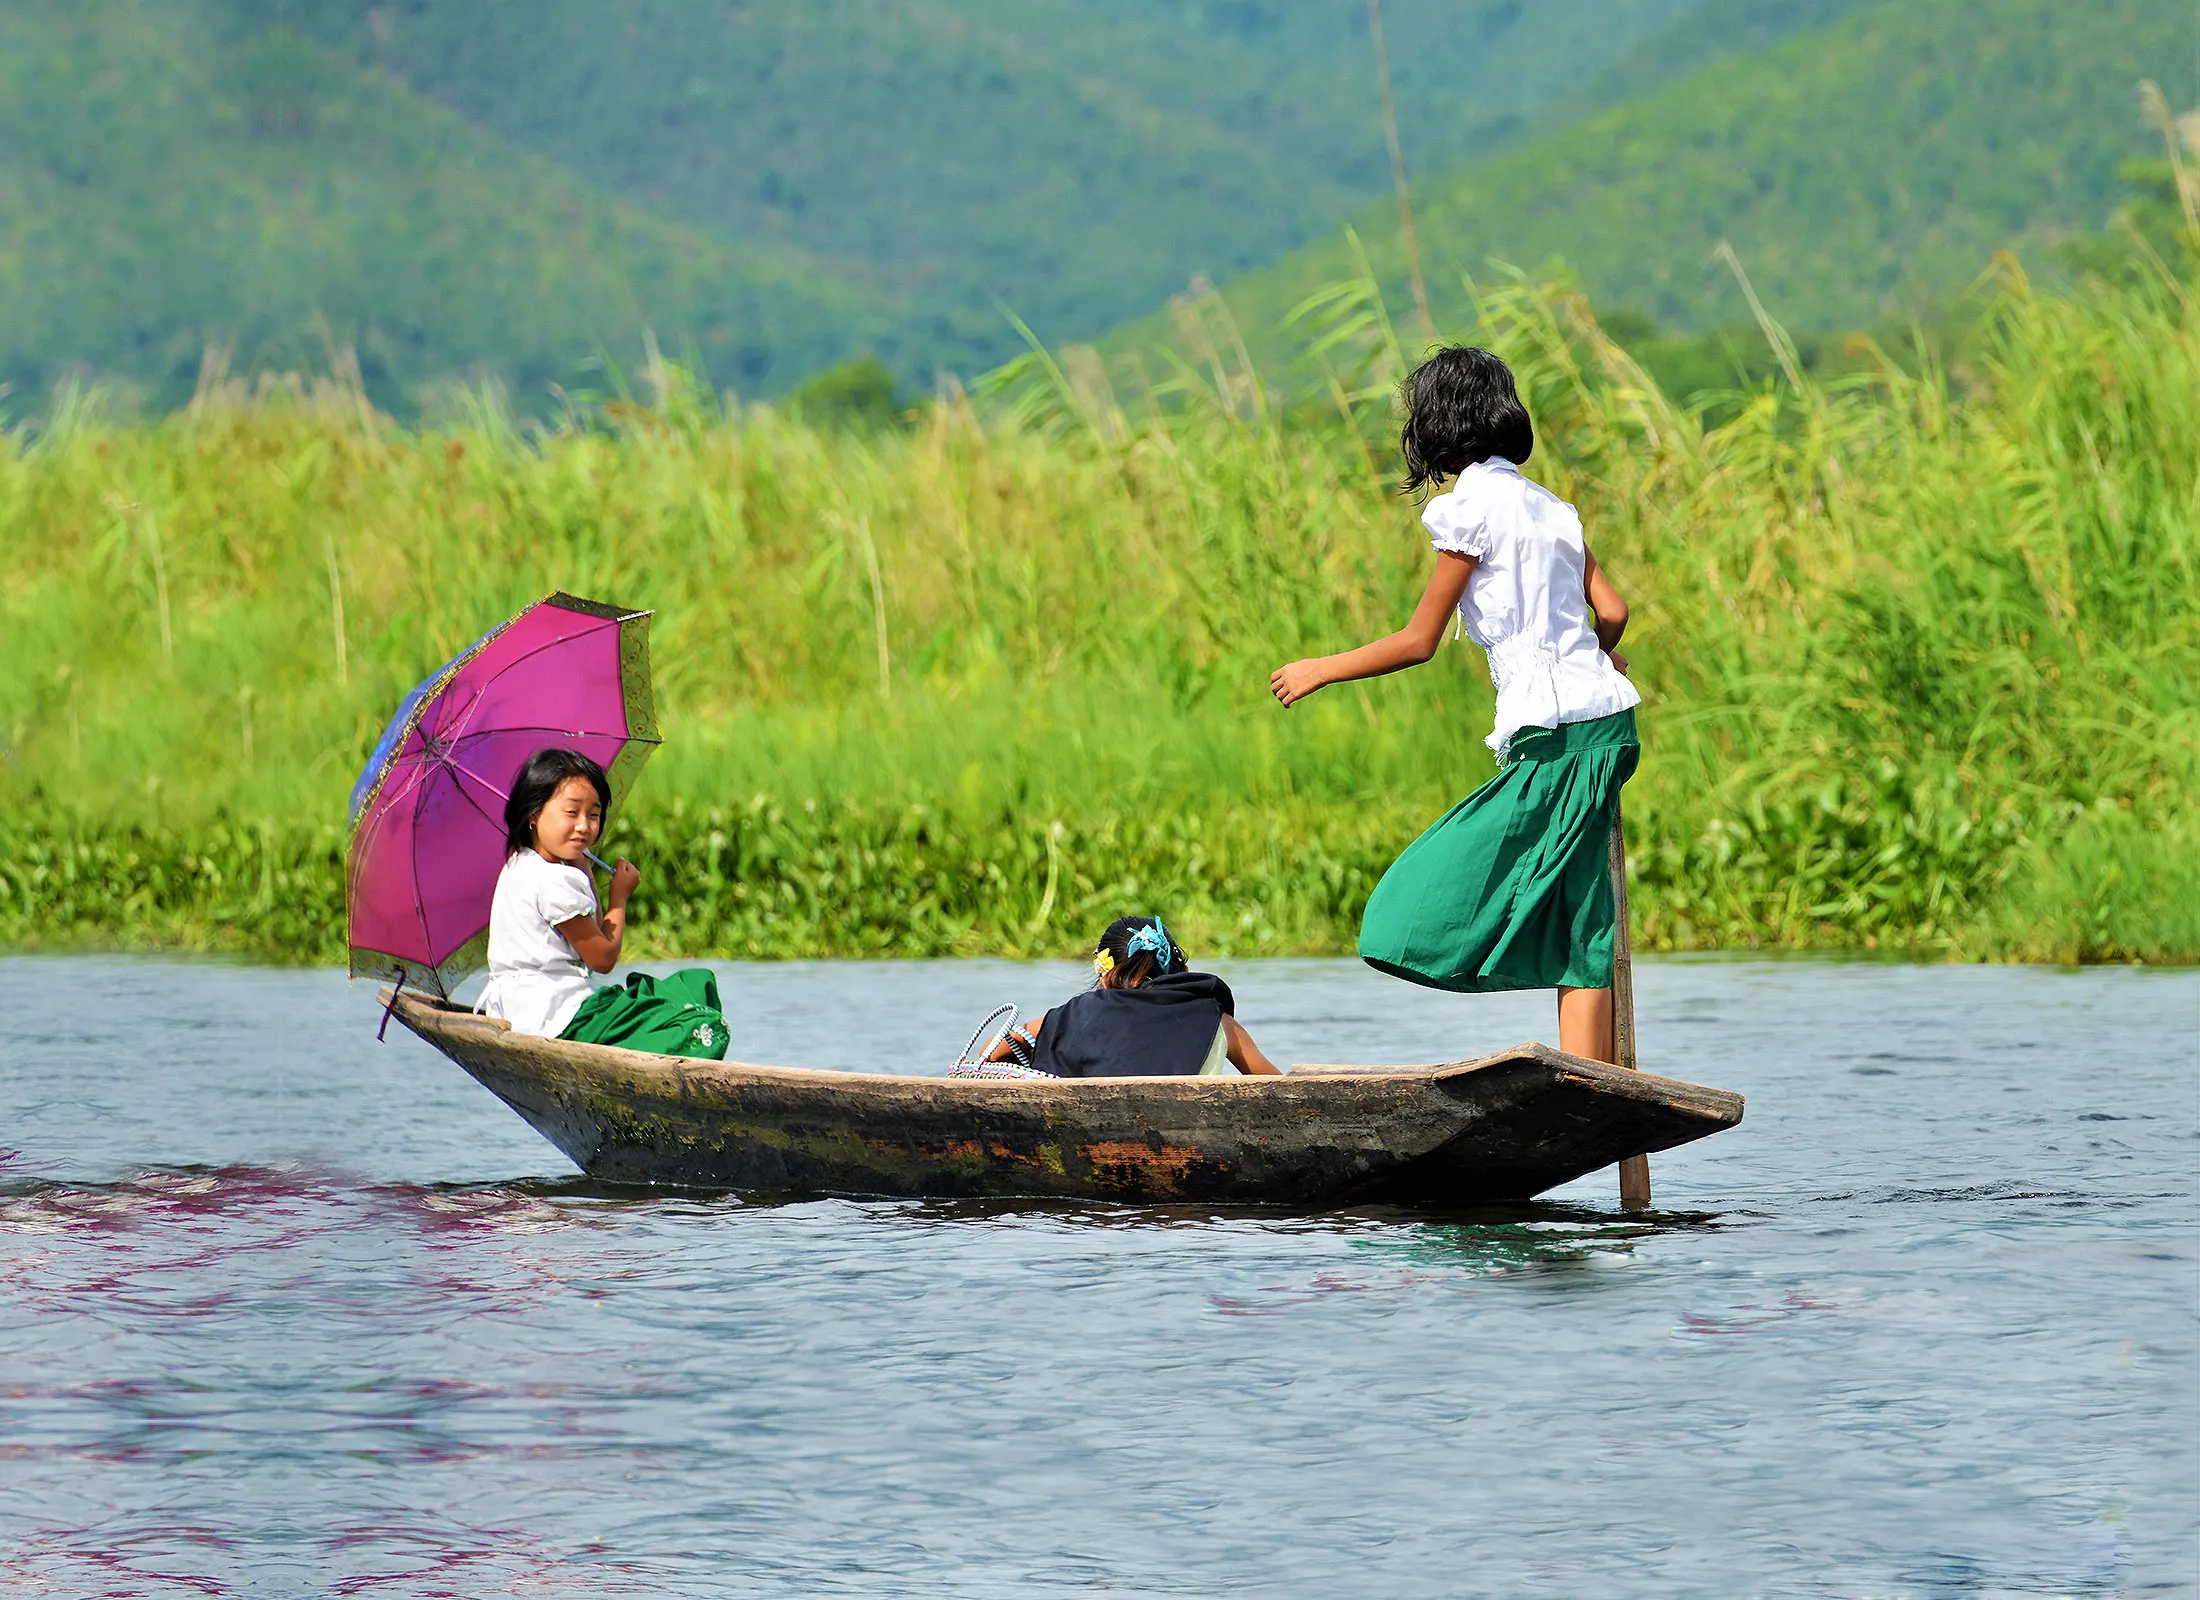 Returning from School on Inle Lake